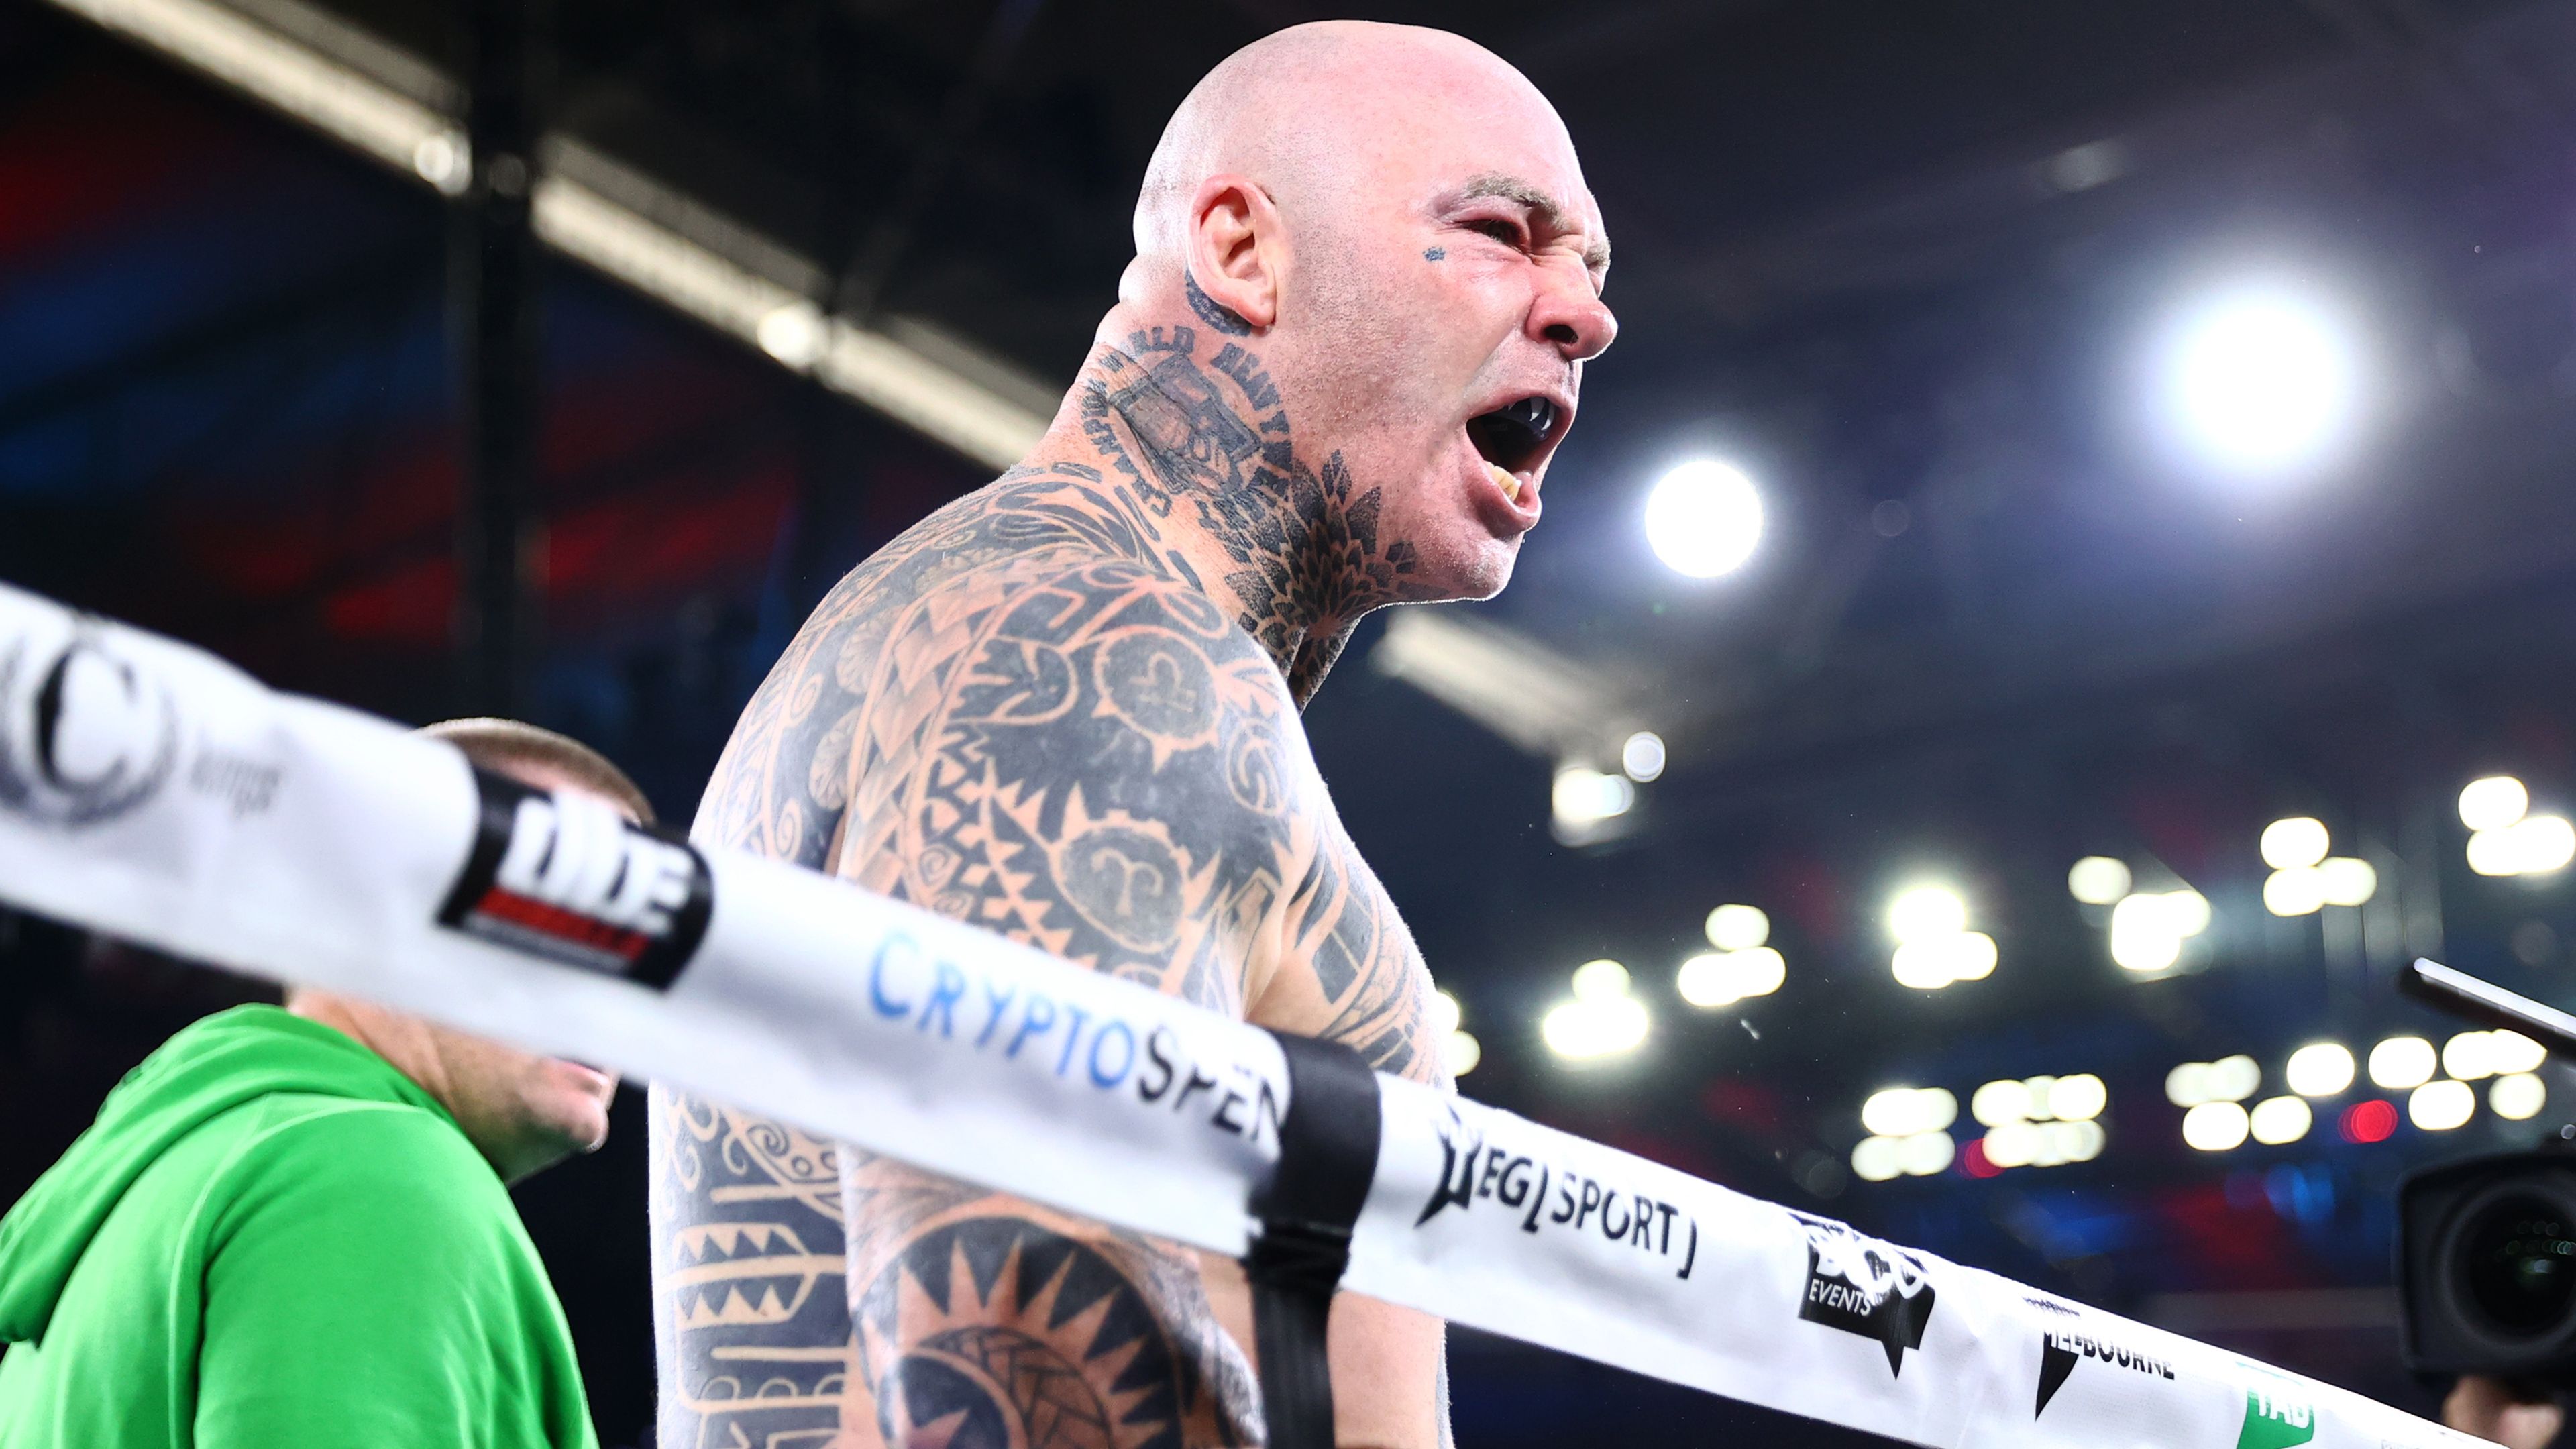 Lucas Browne sprays commentator after knocking out Junior Fa in first round